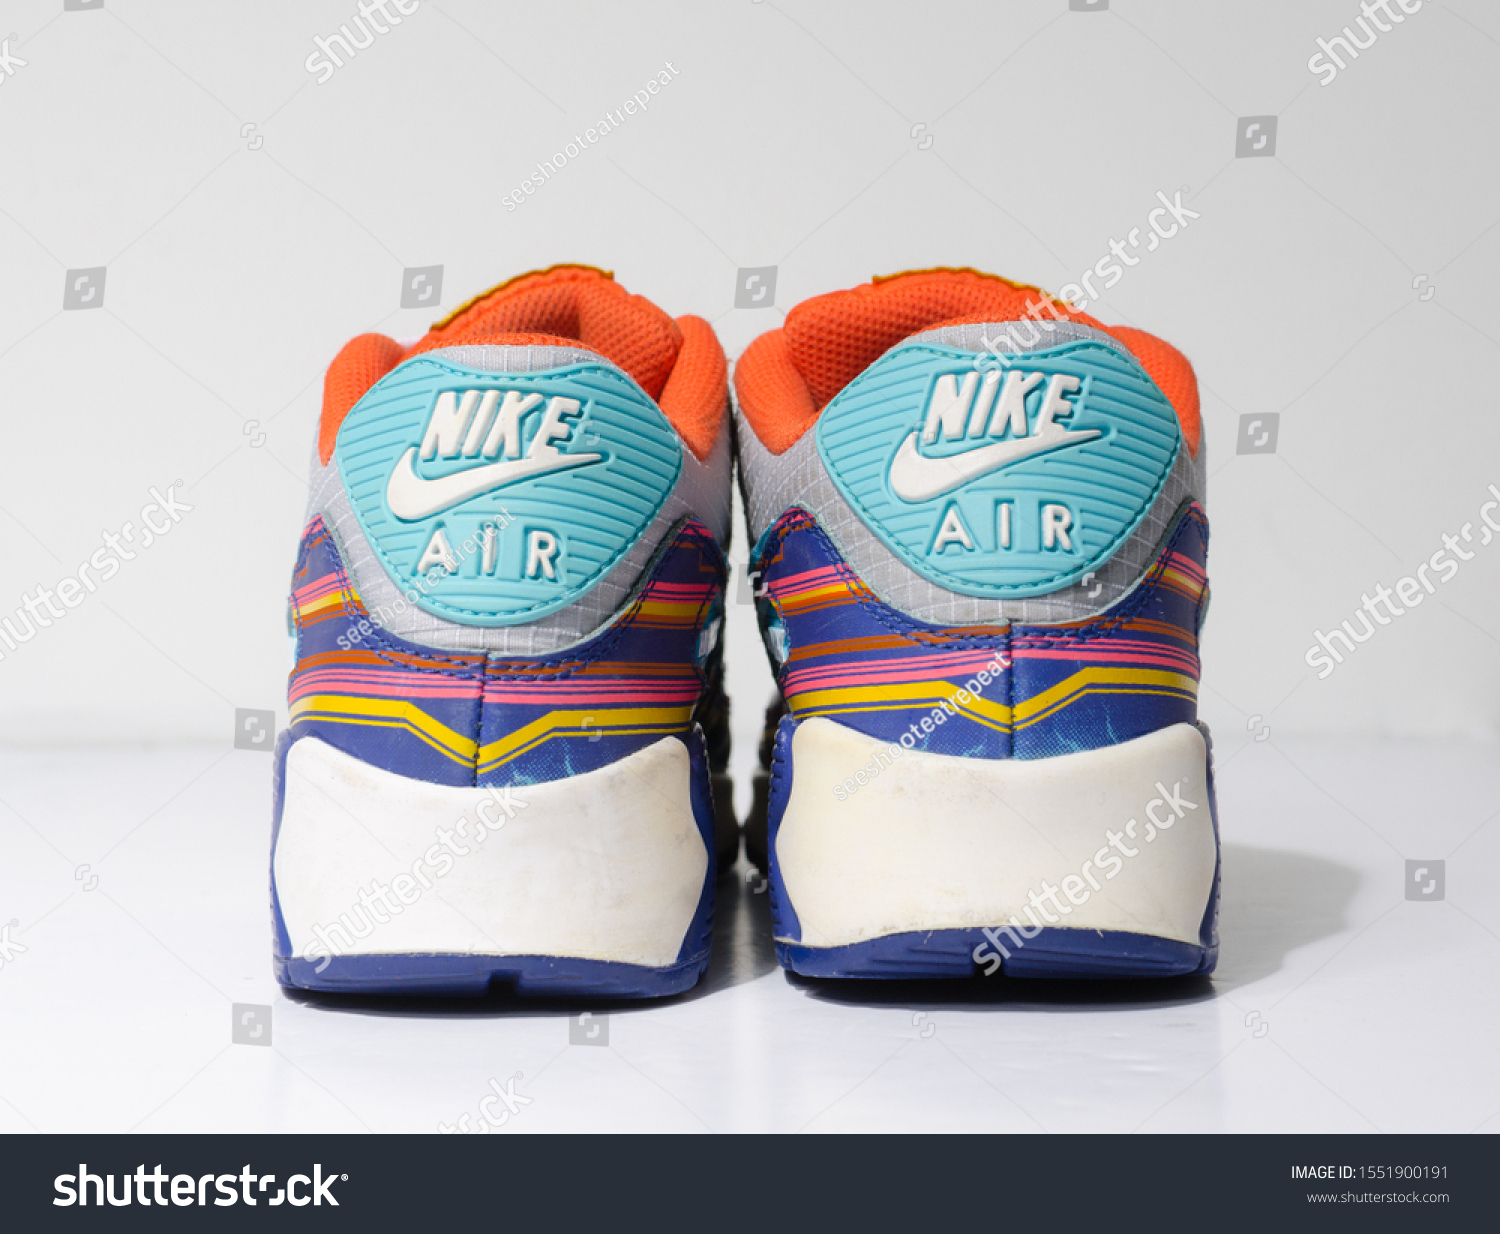 nike air max limited edition 2018